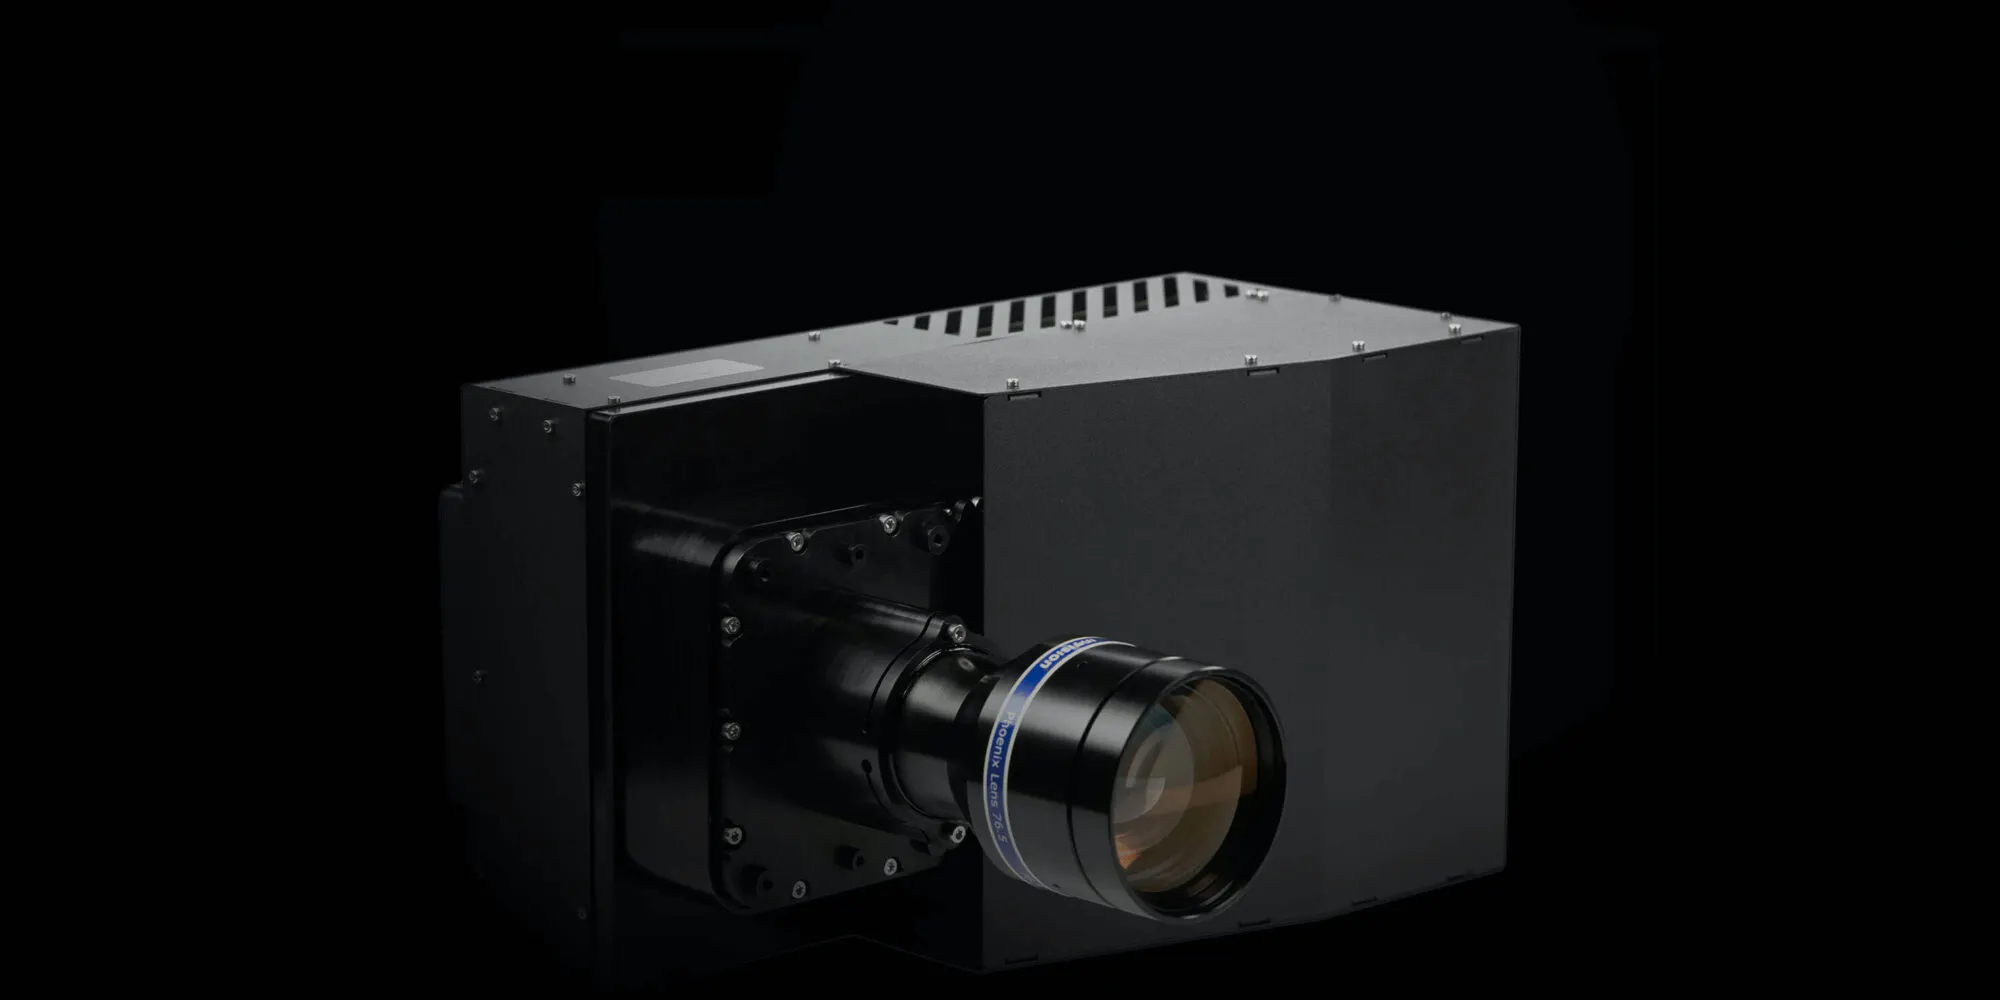 In-Vision's new high performance 4K UV Projector